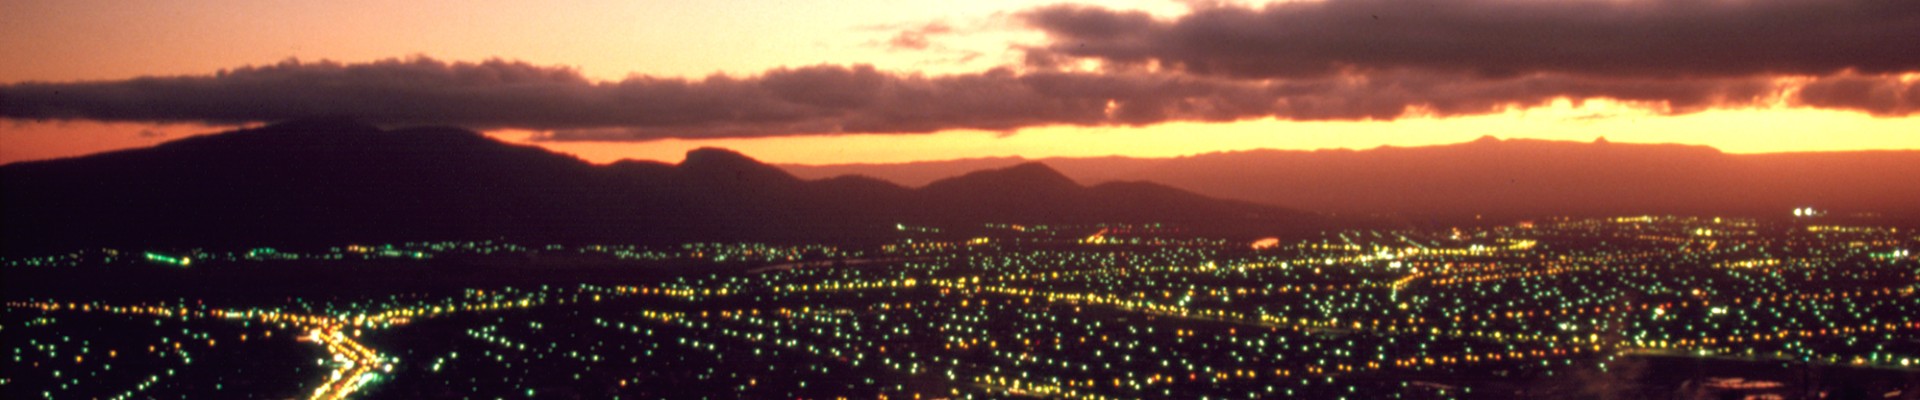 City lights of Townsville twinkle as the sun disappears below the horizon 1985